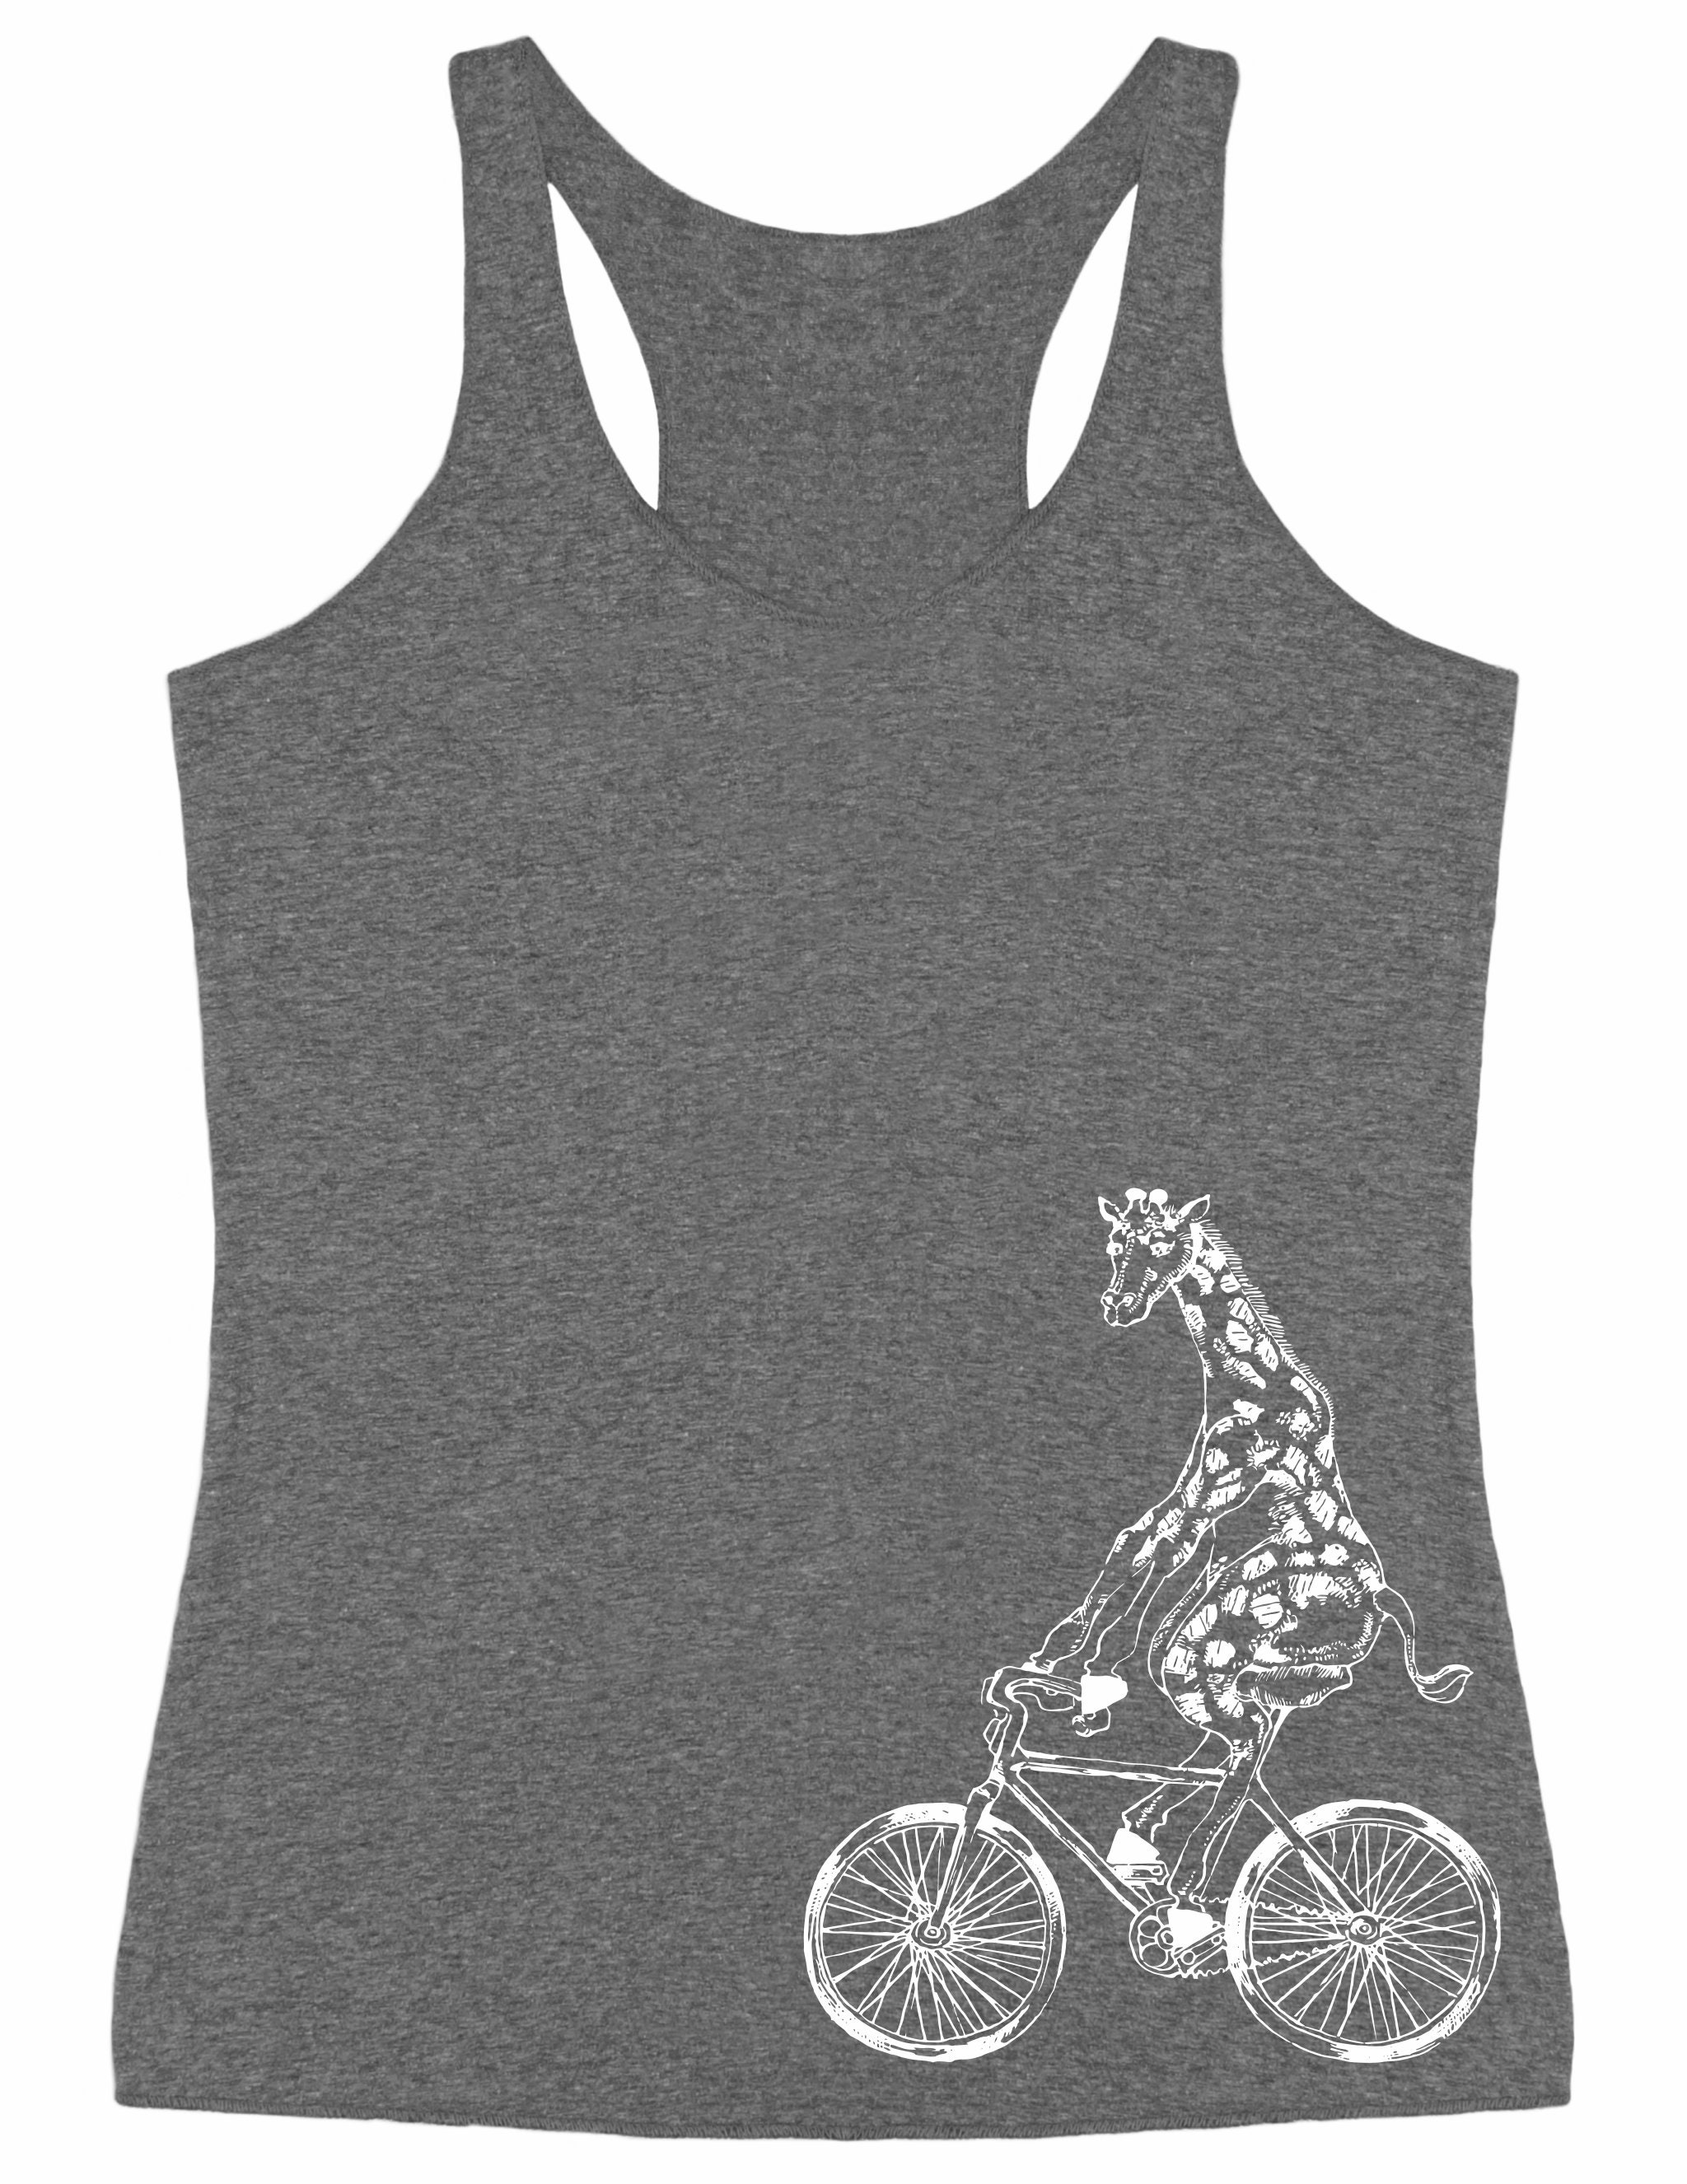 Giraffe On A Bicycle Women's Tri-Blend Tank Top, Girlfriend Gift For Birthday, Her Cycling, Cyclist Wife Gift, Mom Gifts Seembo